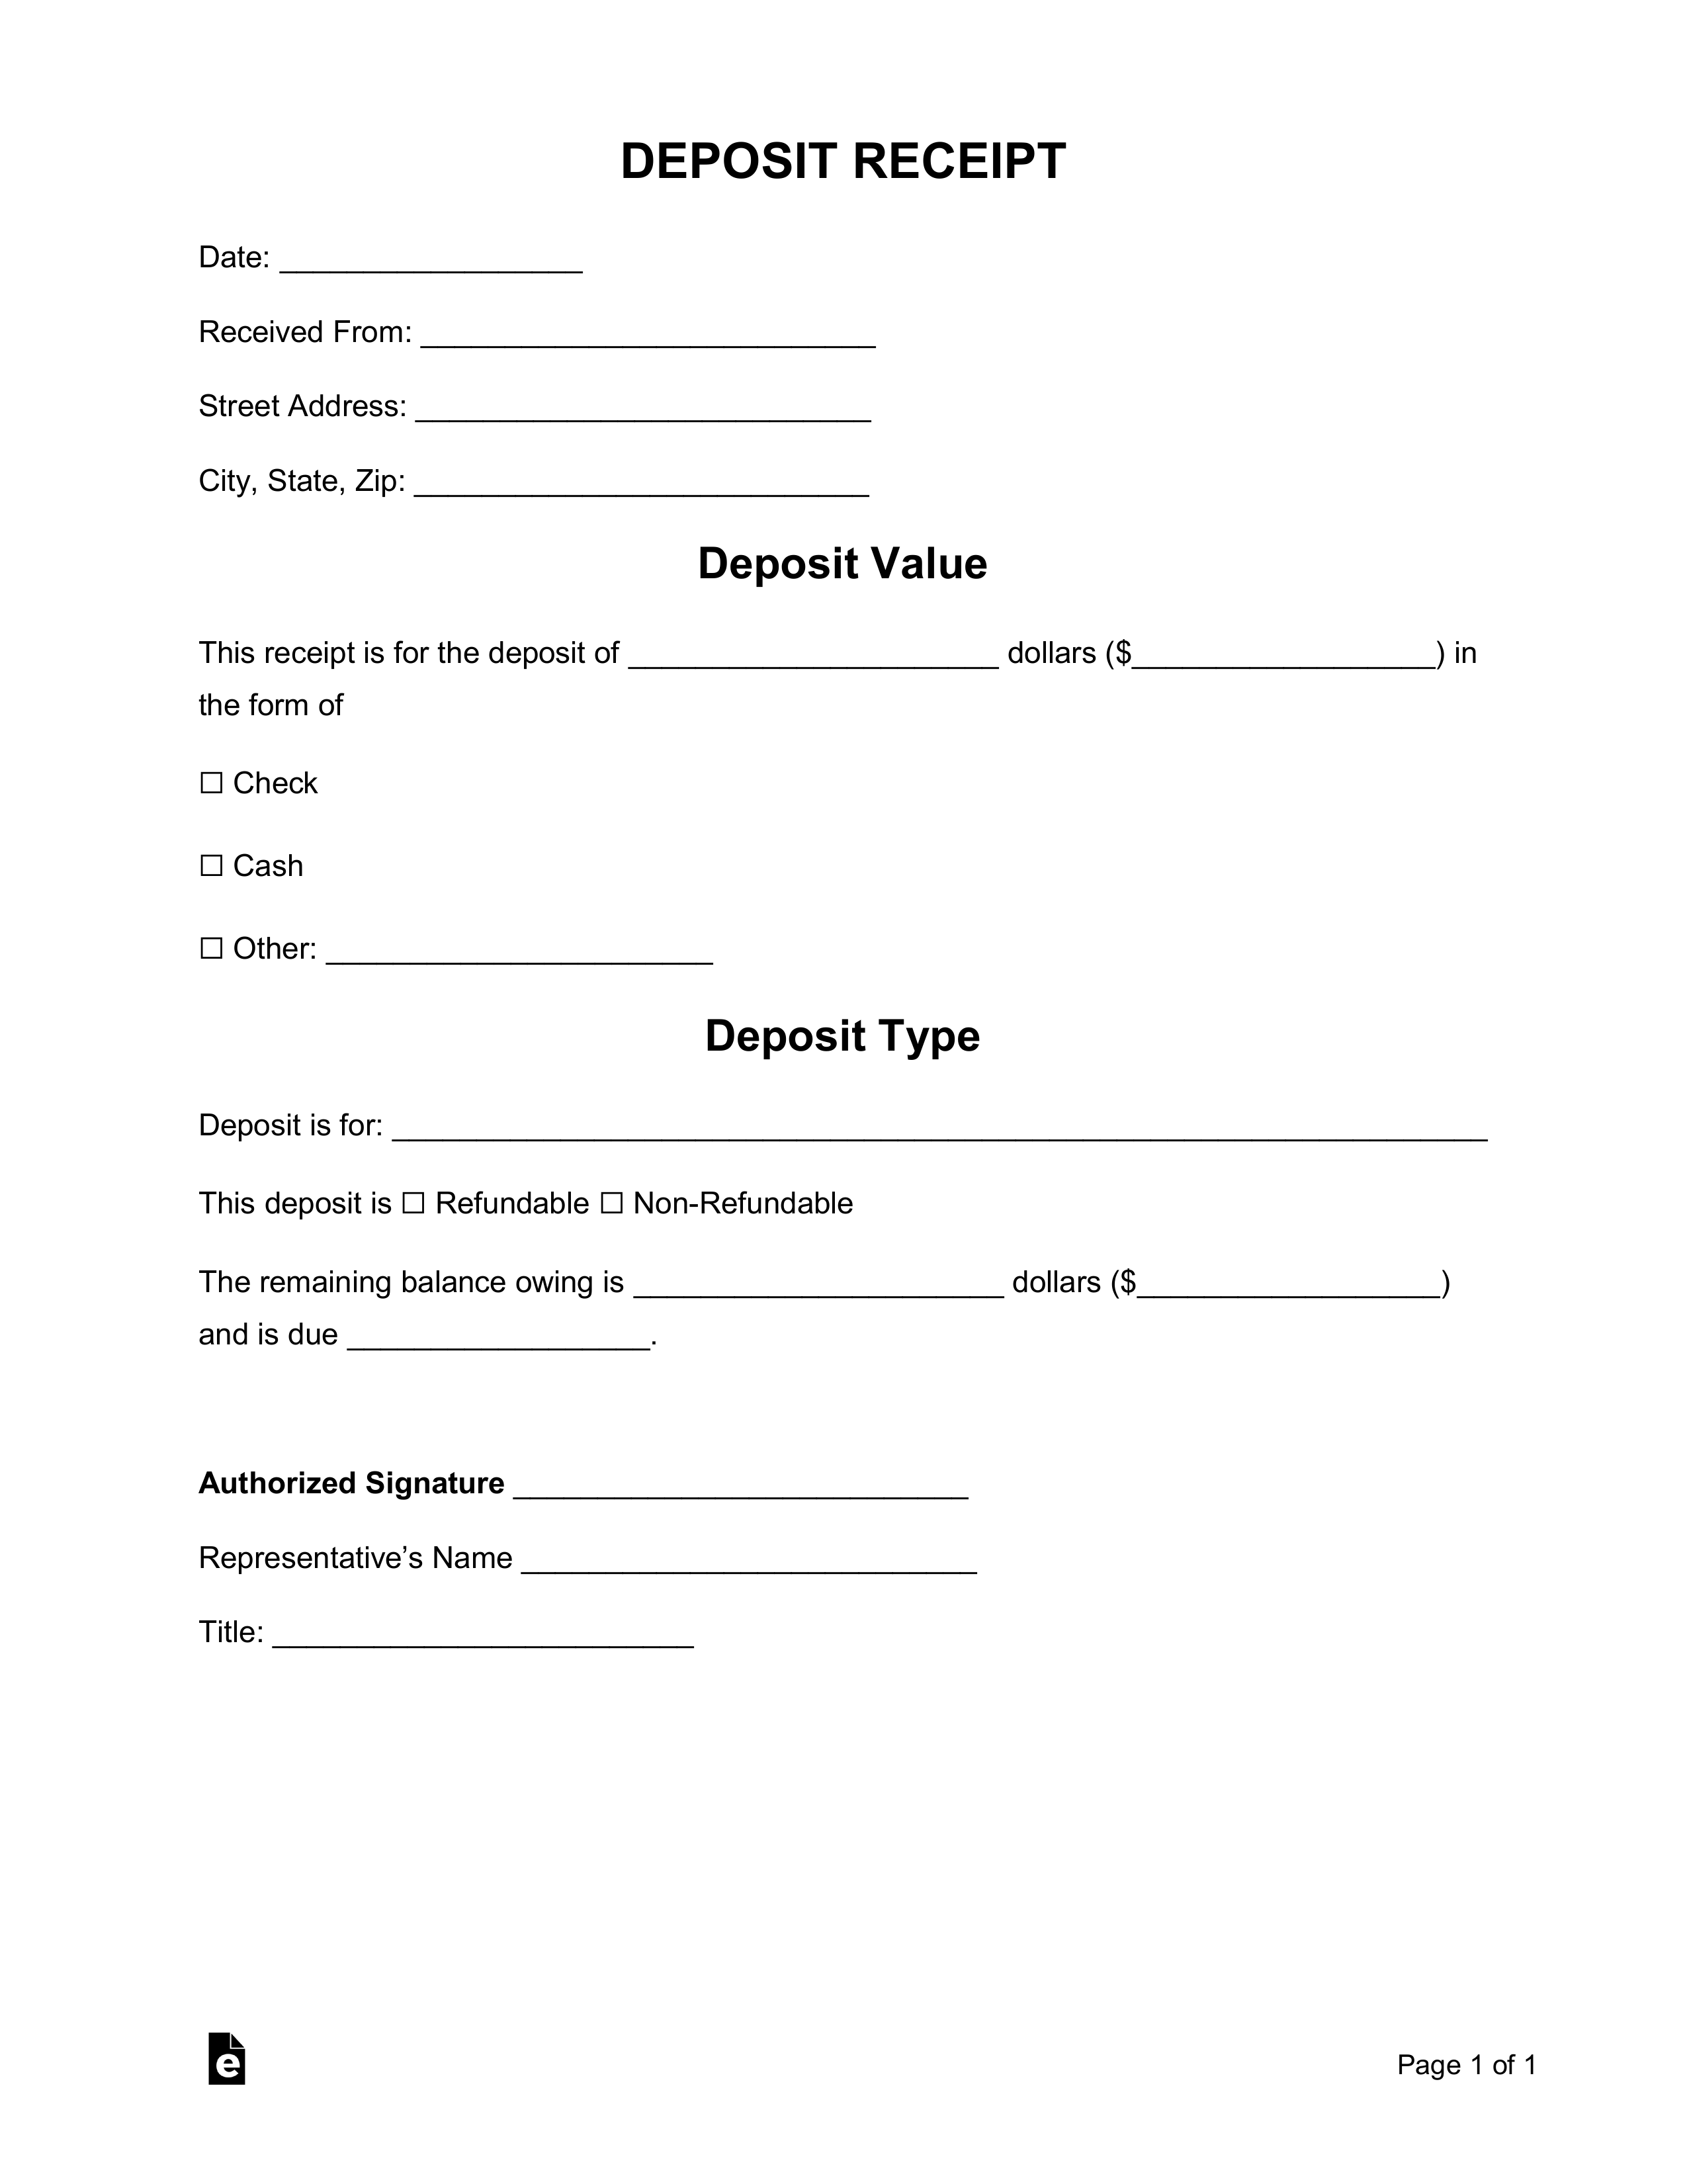 Free Deposit Receipt Templates - Word  PDF – eForms In Non Refundable Deposit Agreement Template With Regard To Non Refundable Deposit Agreement Template